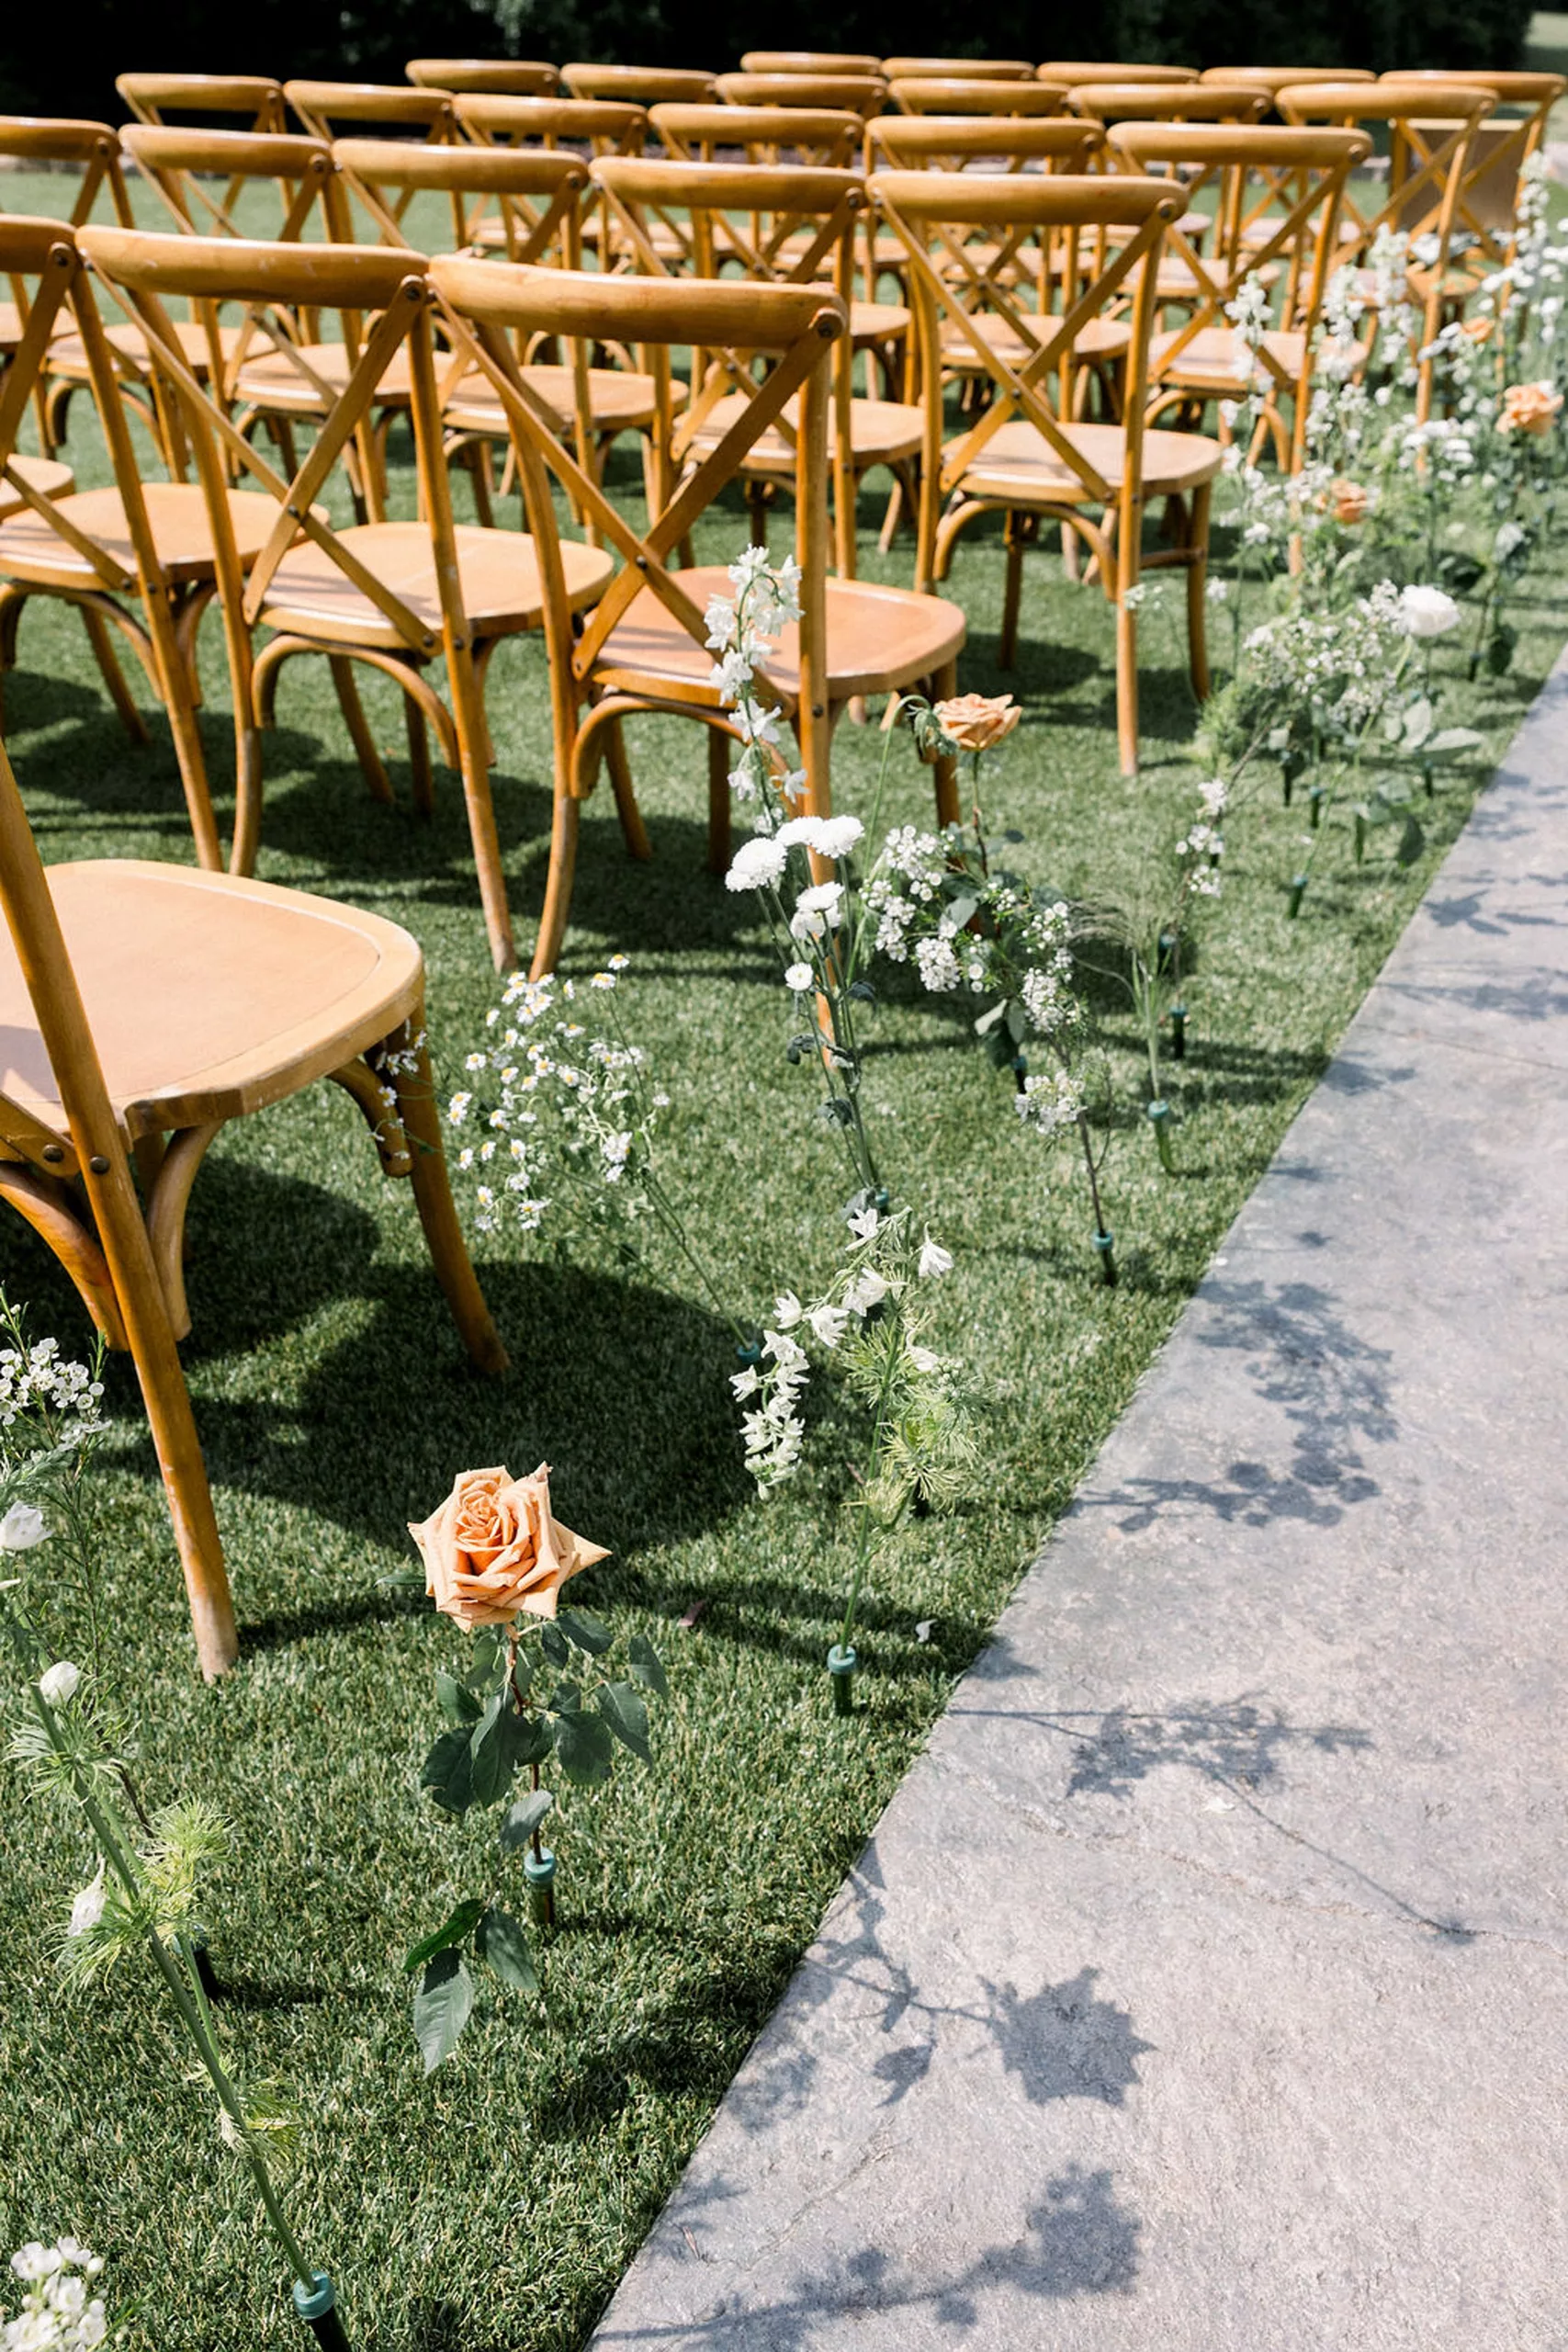 Details of wooden chairs set up for a wedding ceremony along a cement path through grass lined with white and pink flowers at meadows at mossy creek